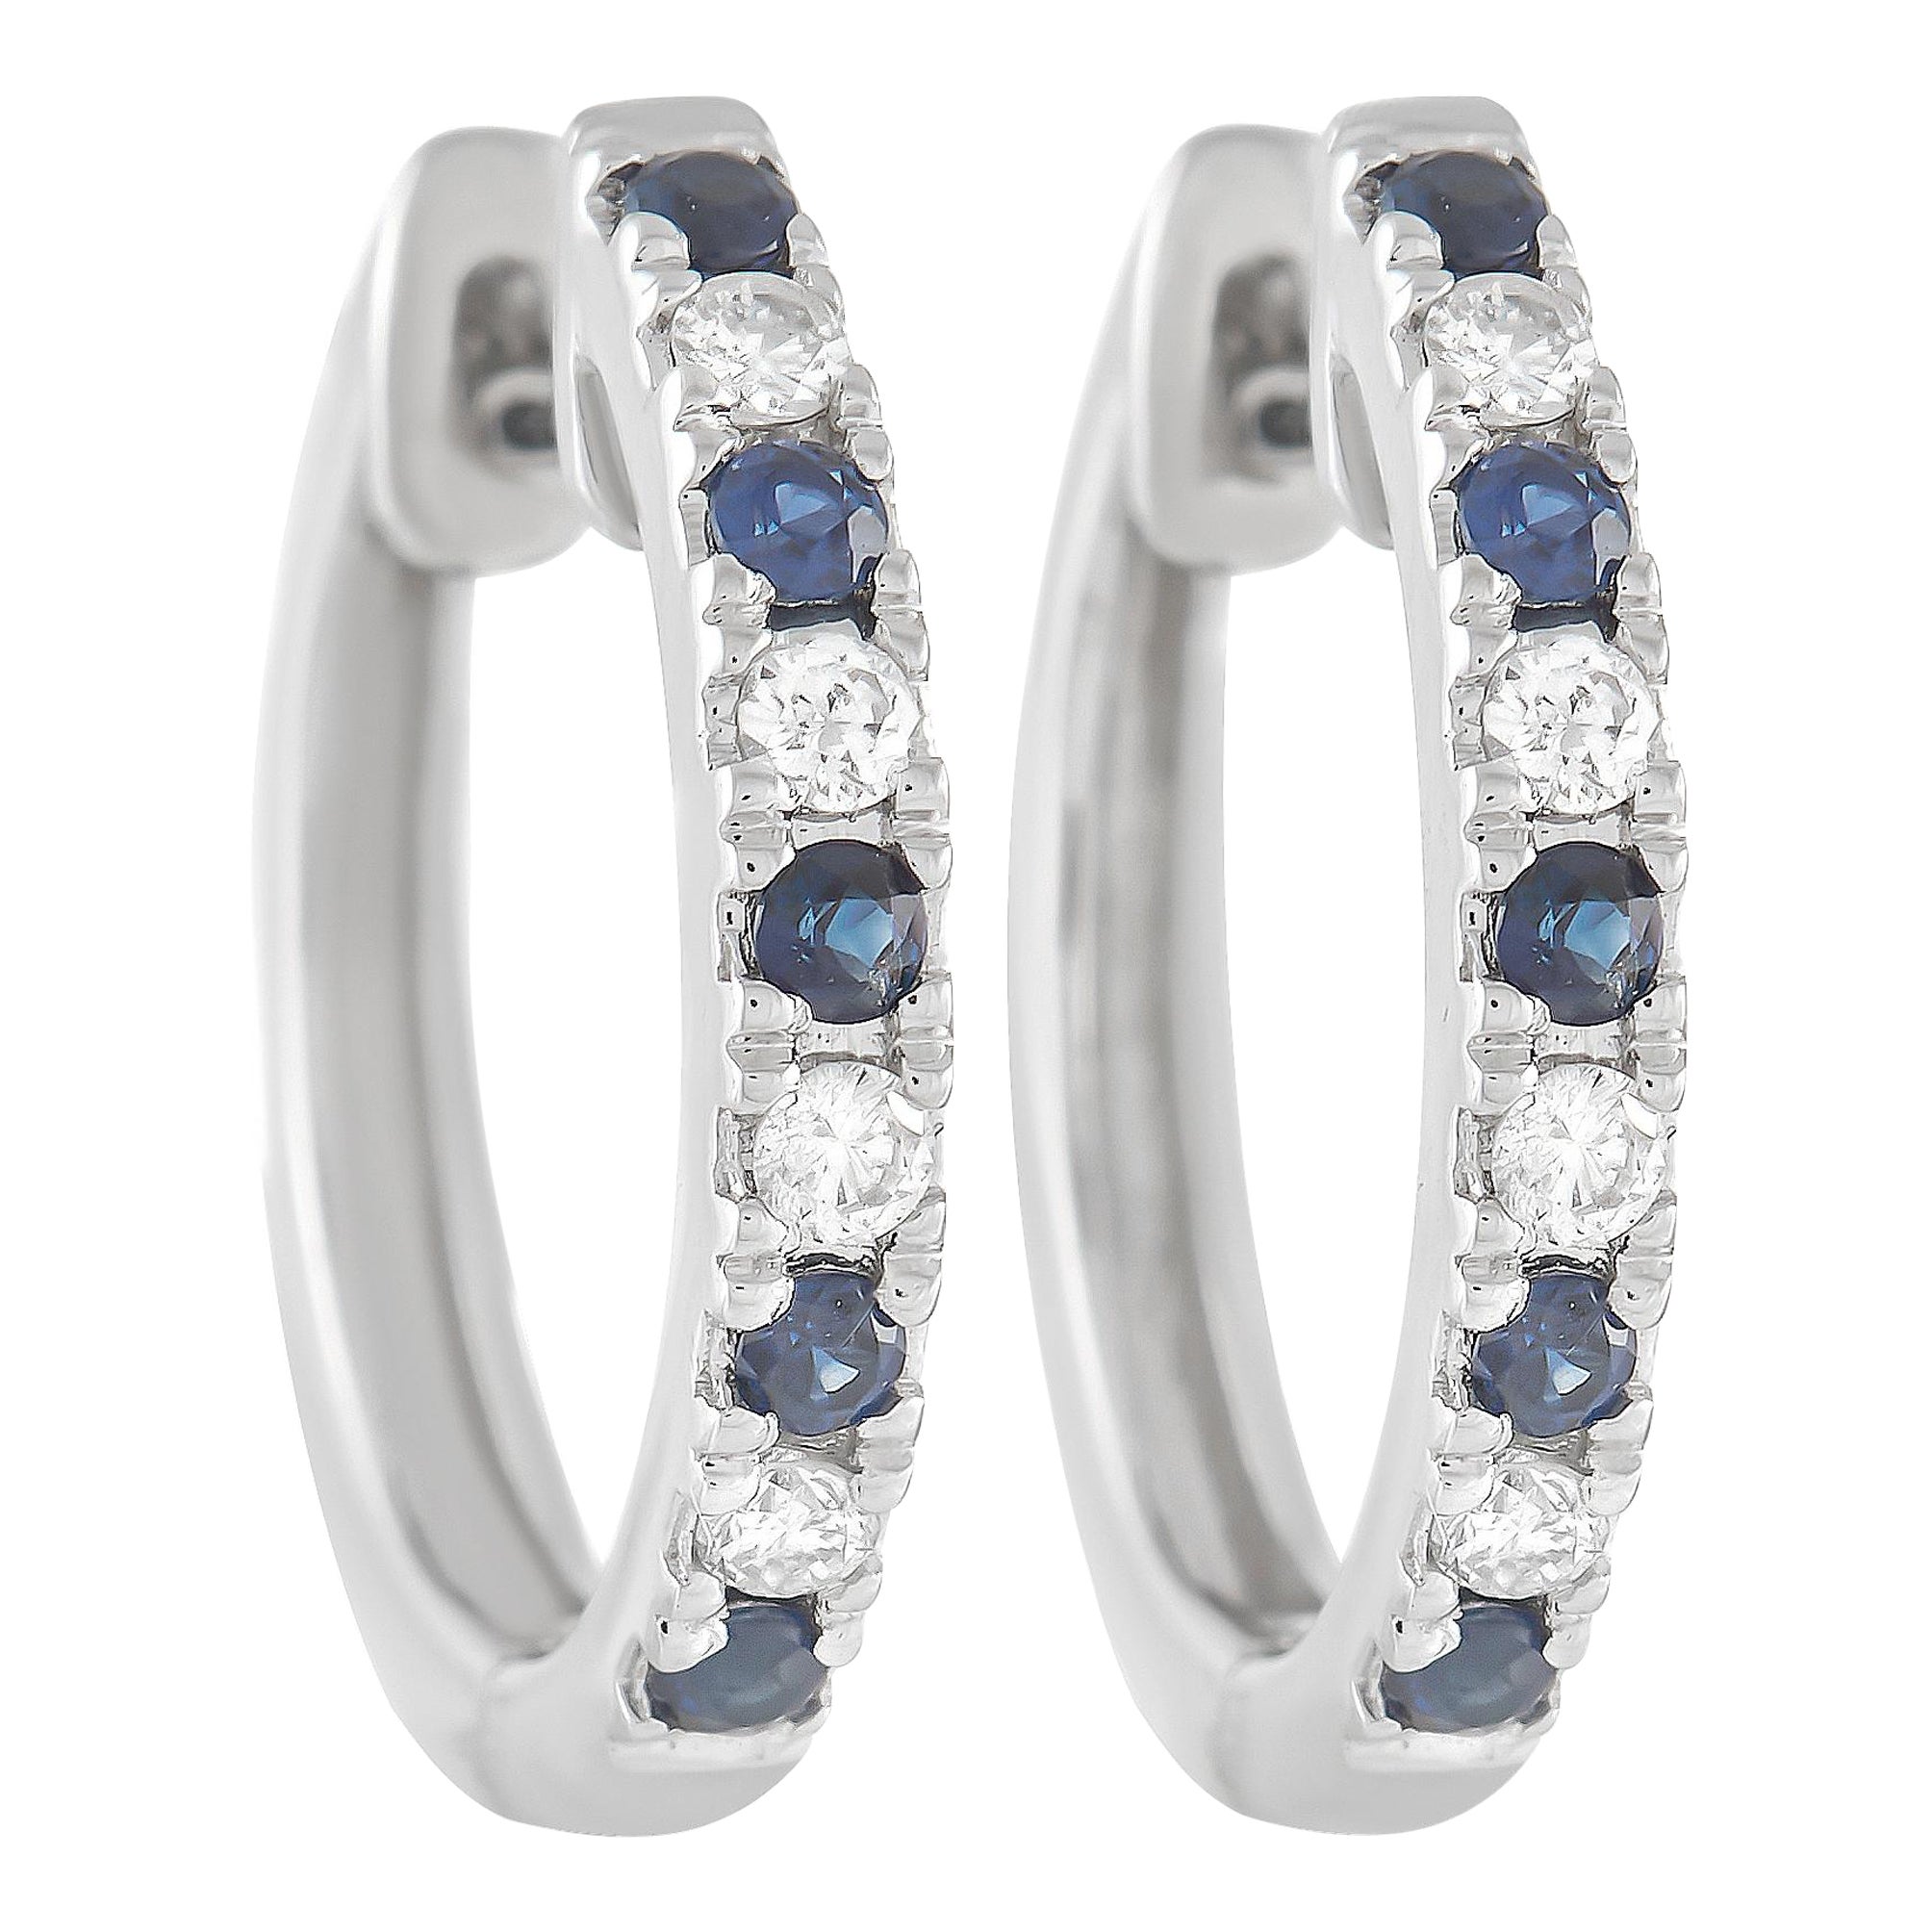 LB Exclusive 14K White Gold 0.11 Ct Diamond and Sapphire Hoop Earrings